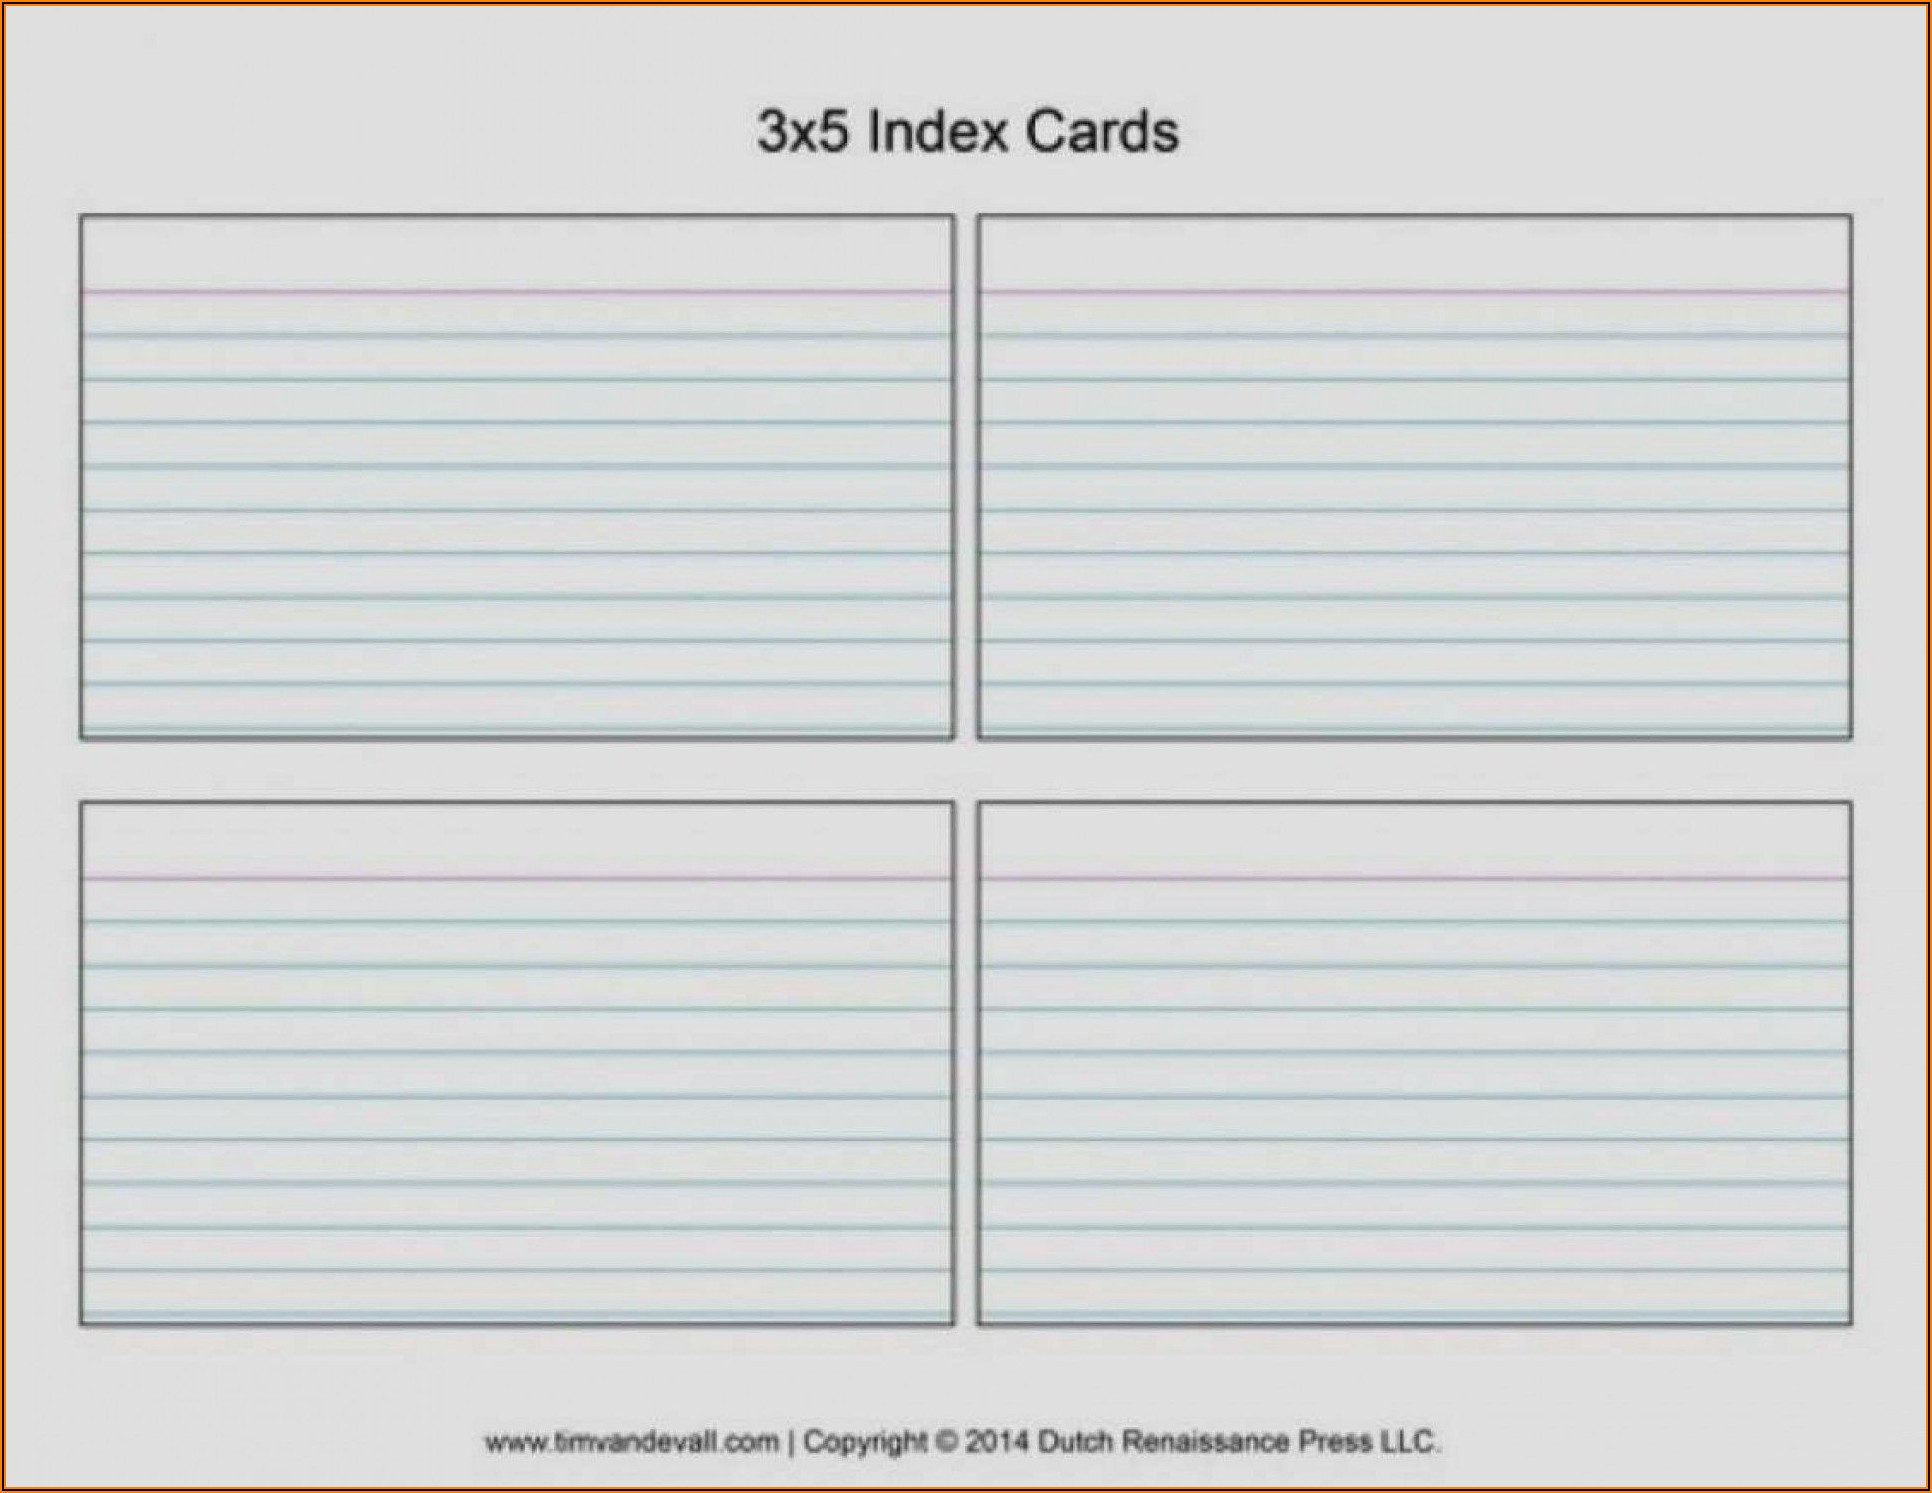 Avery 3x5 Index Card Template